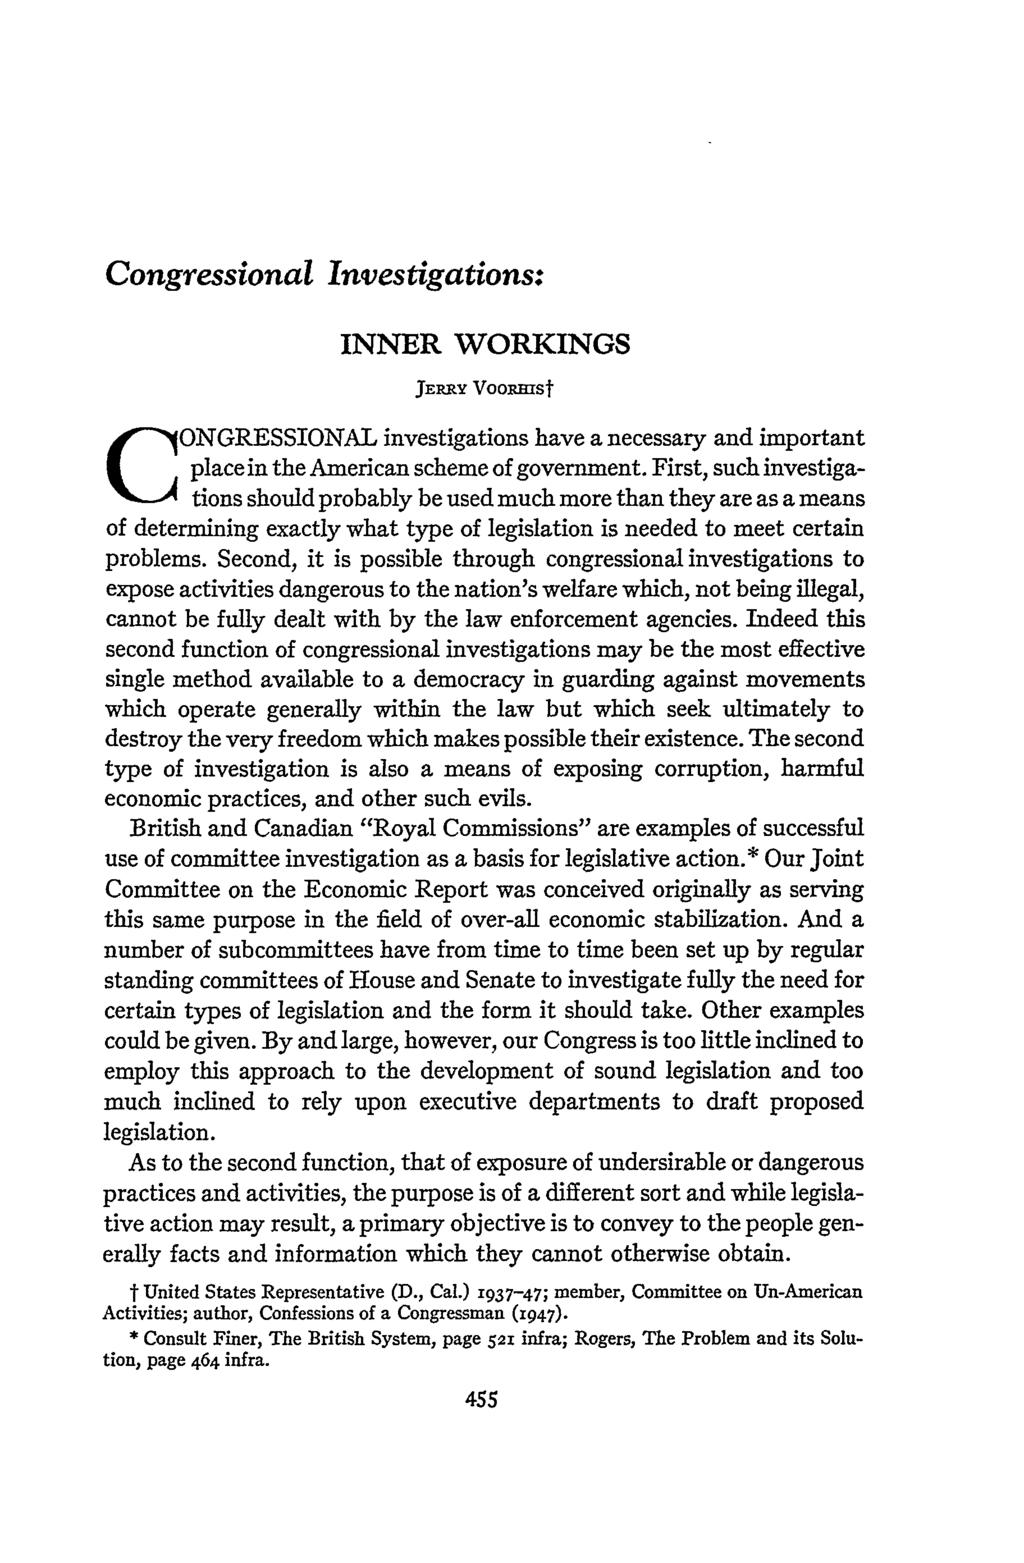 Congressional Investigations: INNER WORKINGS JERRY VooRRist ONGRESSIONAL investigations have a necessary and important place in the American scheme of government.